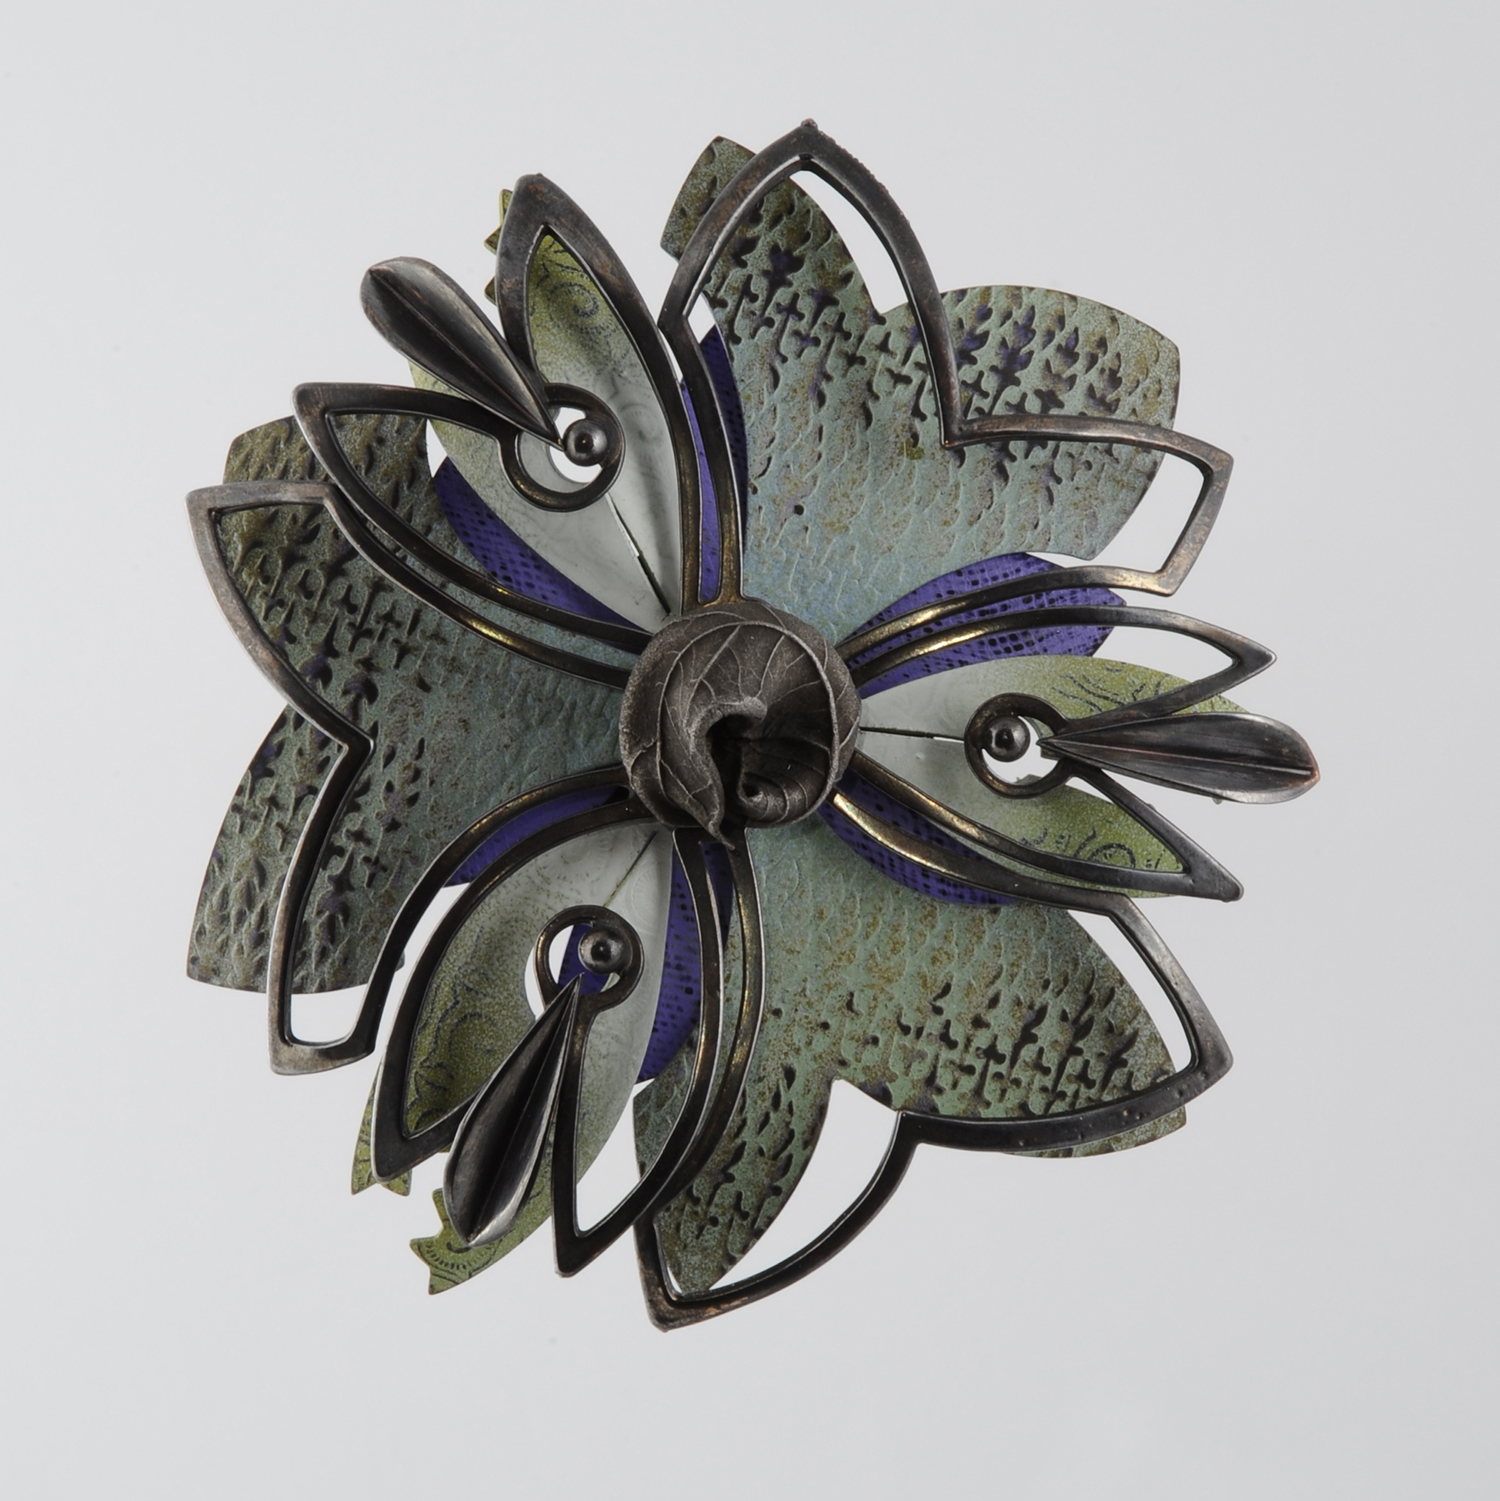 Rosette Brooch 19-15  |  2015  |  bronze, acrylic lacquer  |  4 x 4 x 1.25 inches